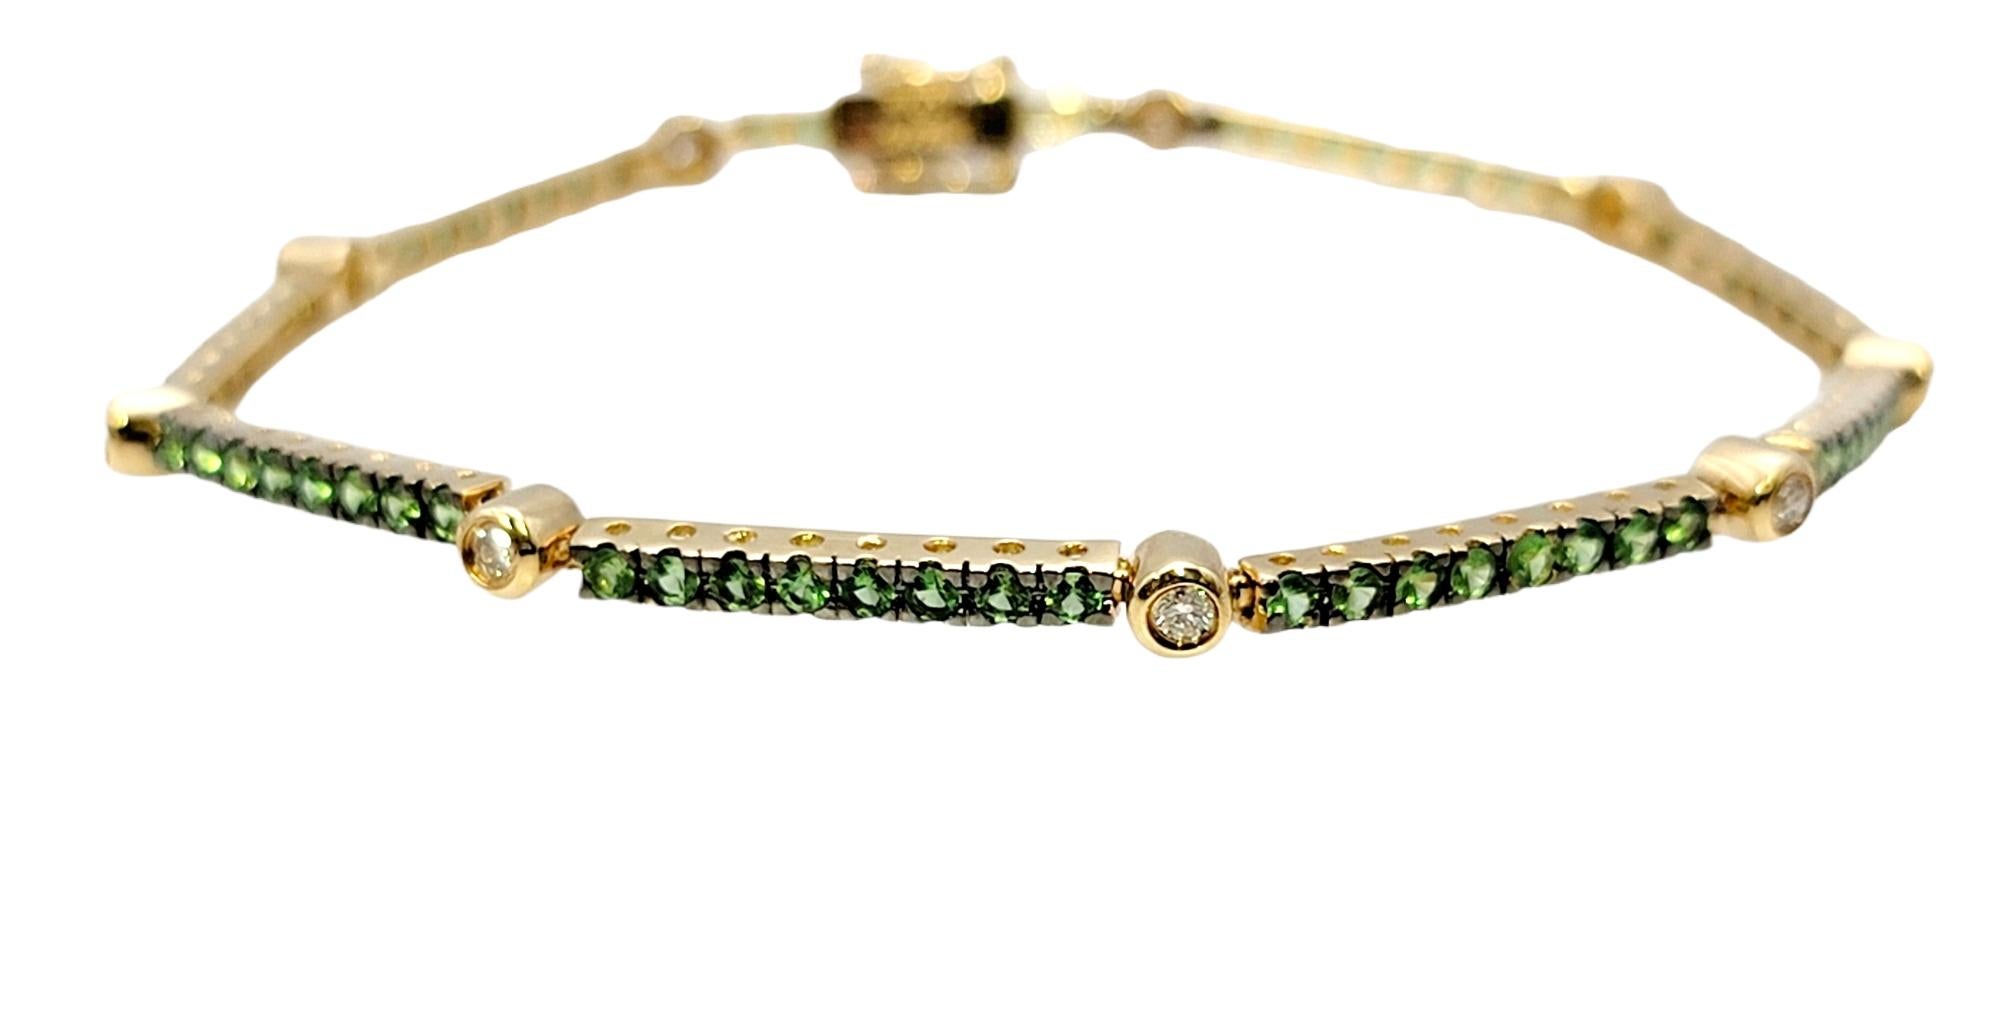 Bright and colorful tsavorite garnet and diamond station tennis bracelet. This lovely, sparkling piece adds a subtle pop of color to the wrist, while remaining delicate and feminine. Would look gorgeous stacked with other bracelets or simply worn on